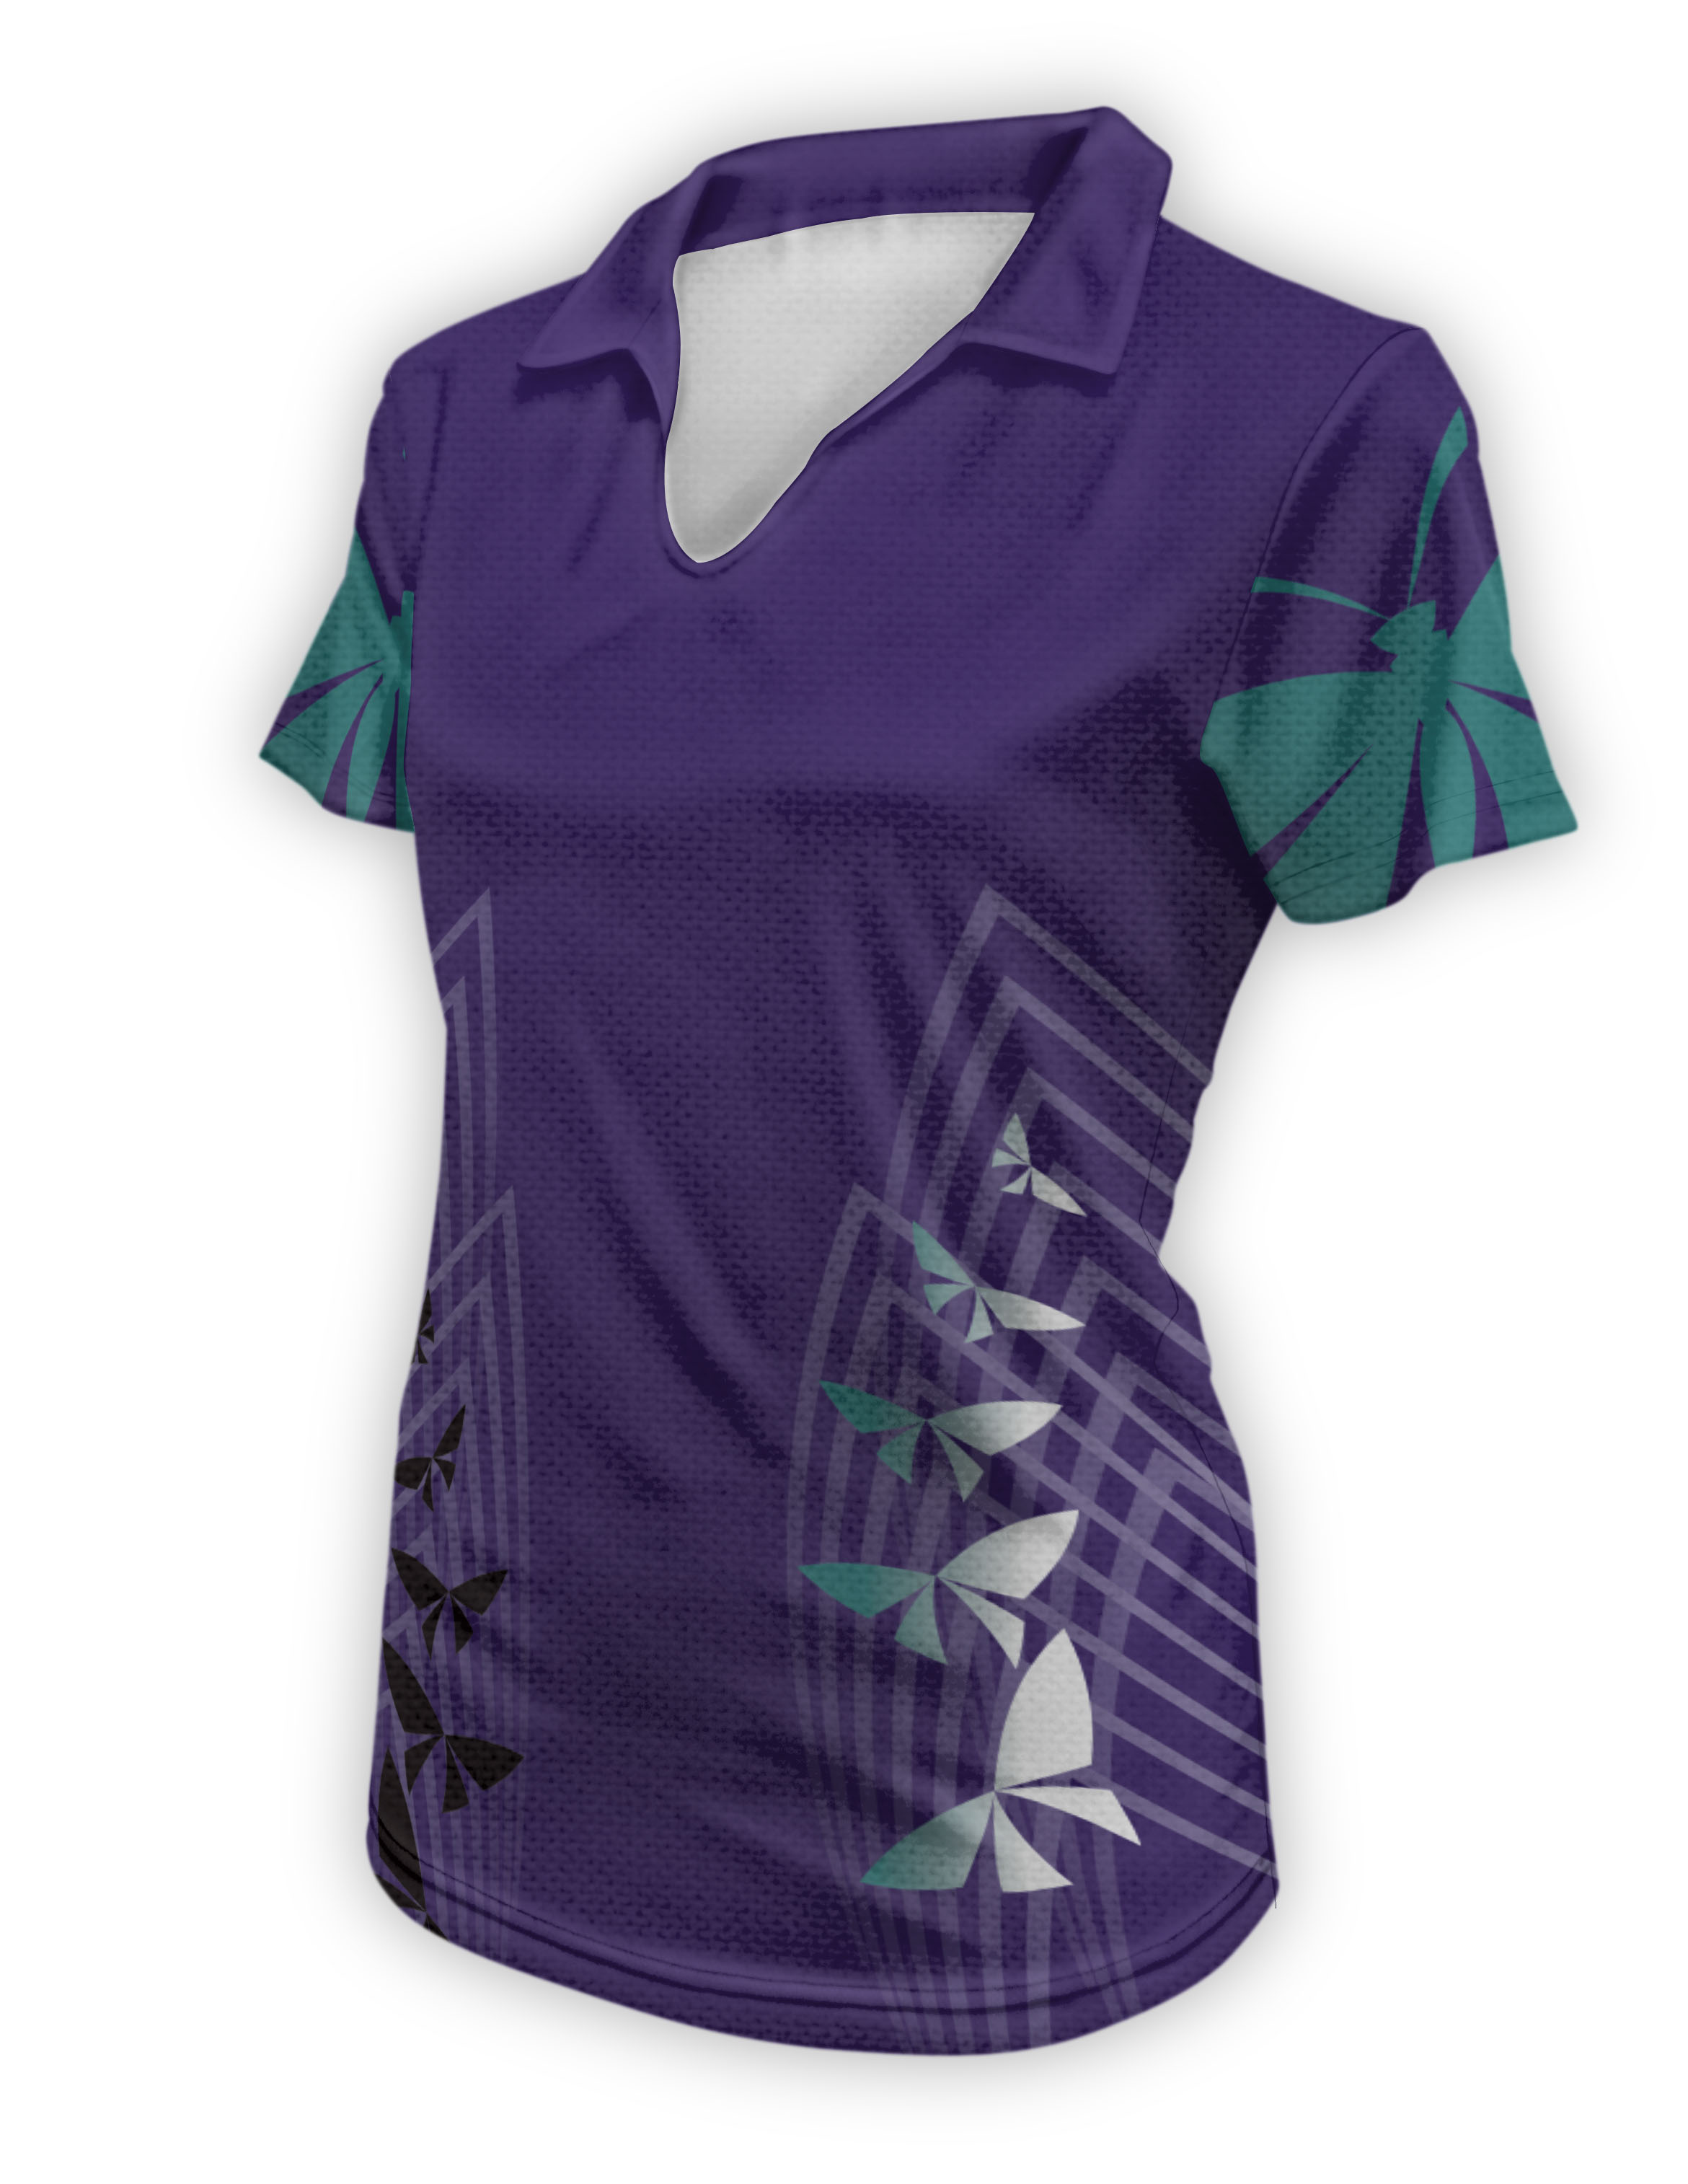 Netball Polo - Design Your Own Netball Uniform Experts | Captivations ...